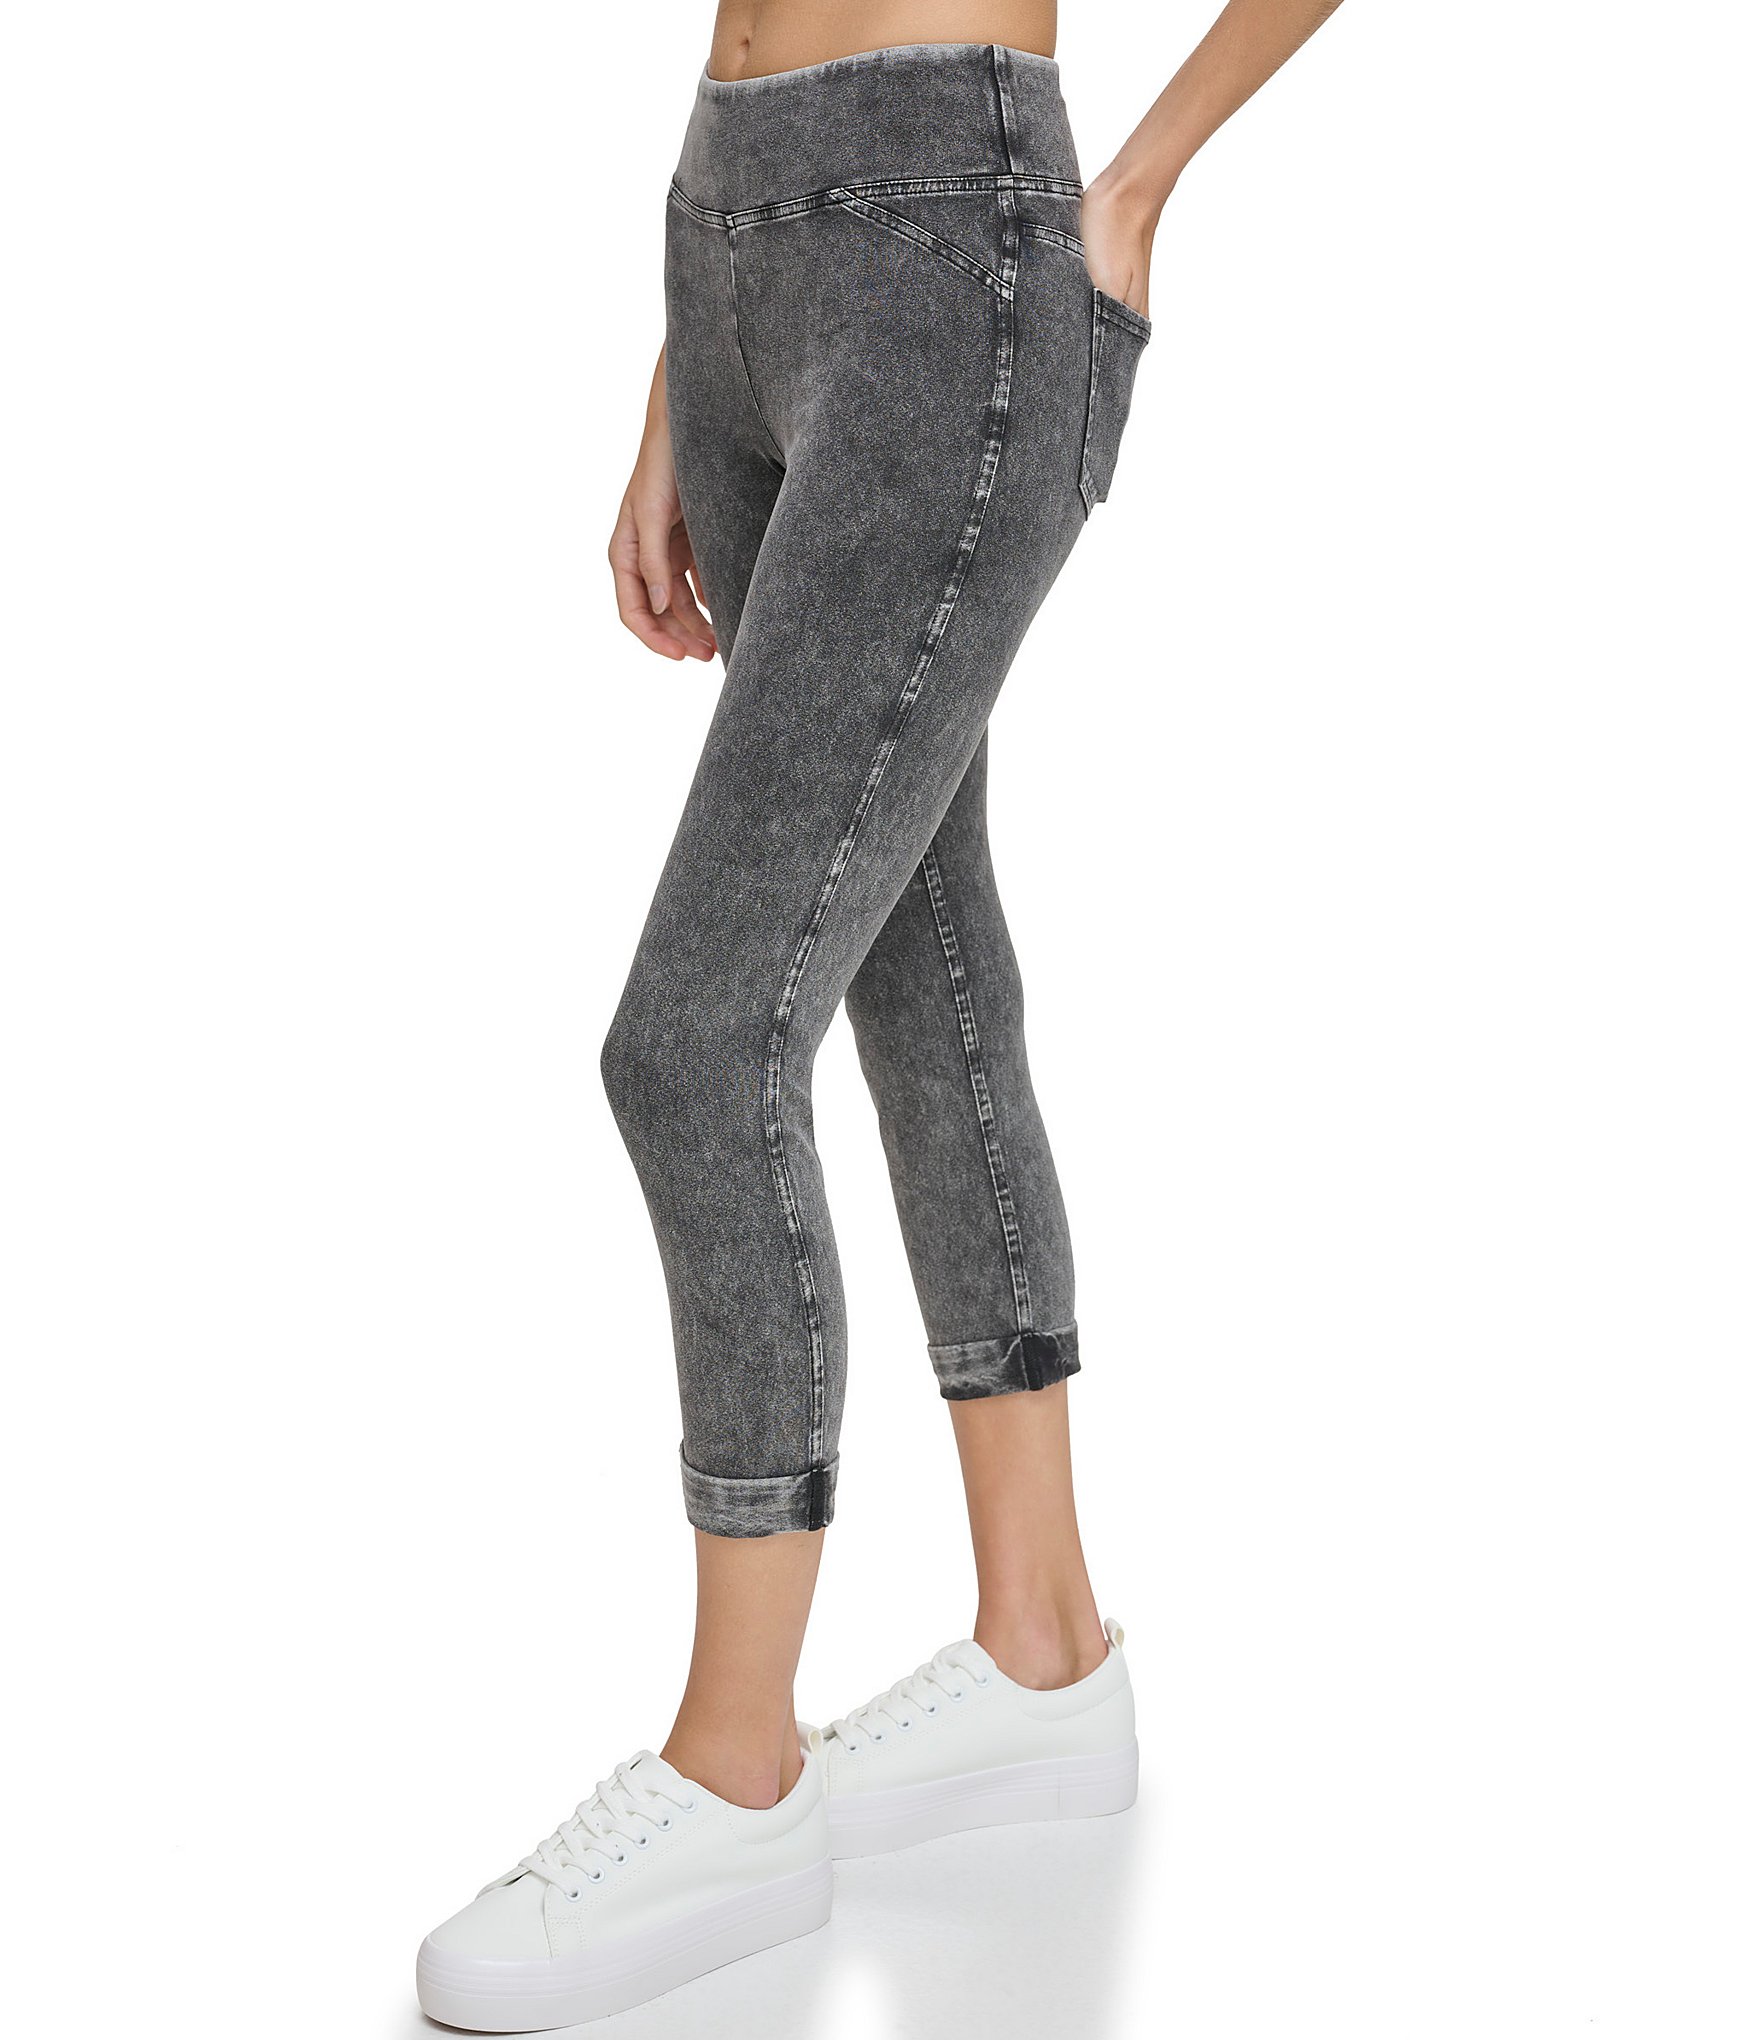 Marc New York Performance Womens Crop Legging with Twisted Side Details